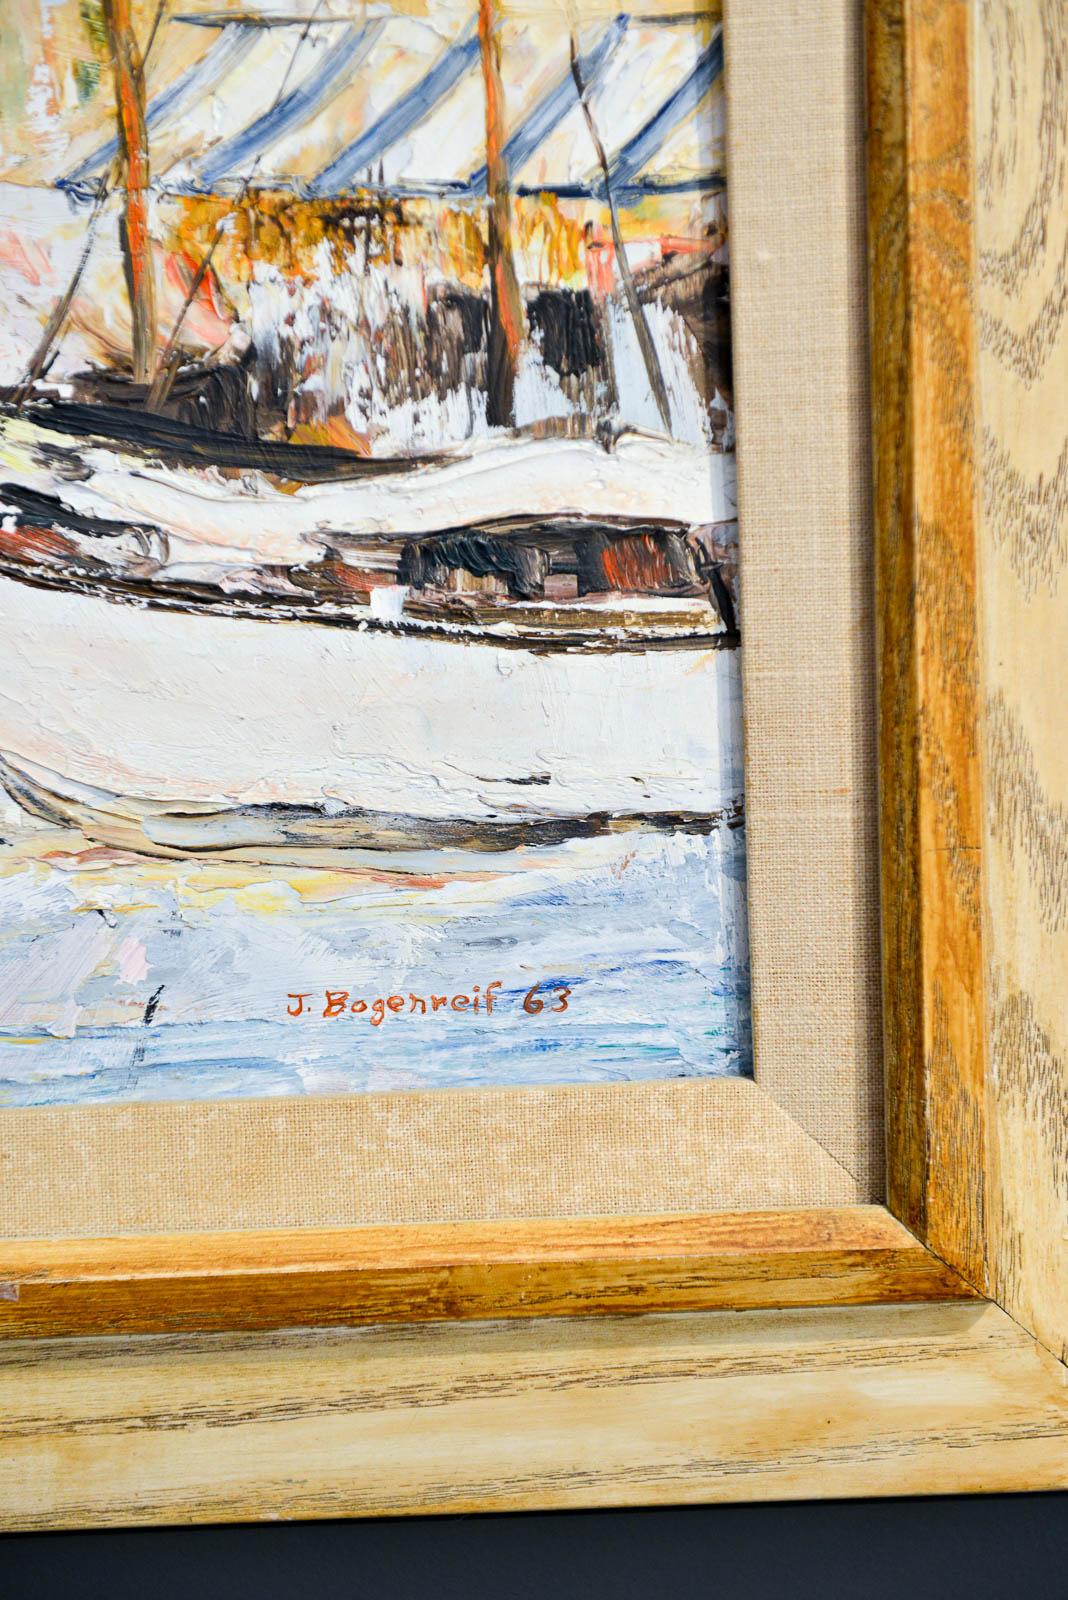 Mid-20th Century Nautical Painting by J. Bogenreif, 1963